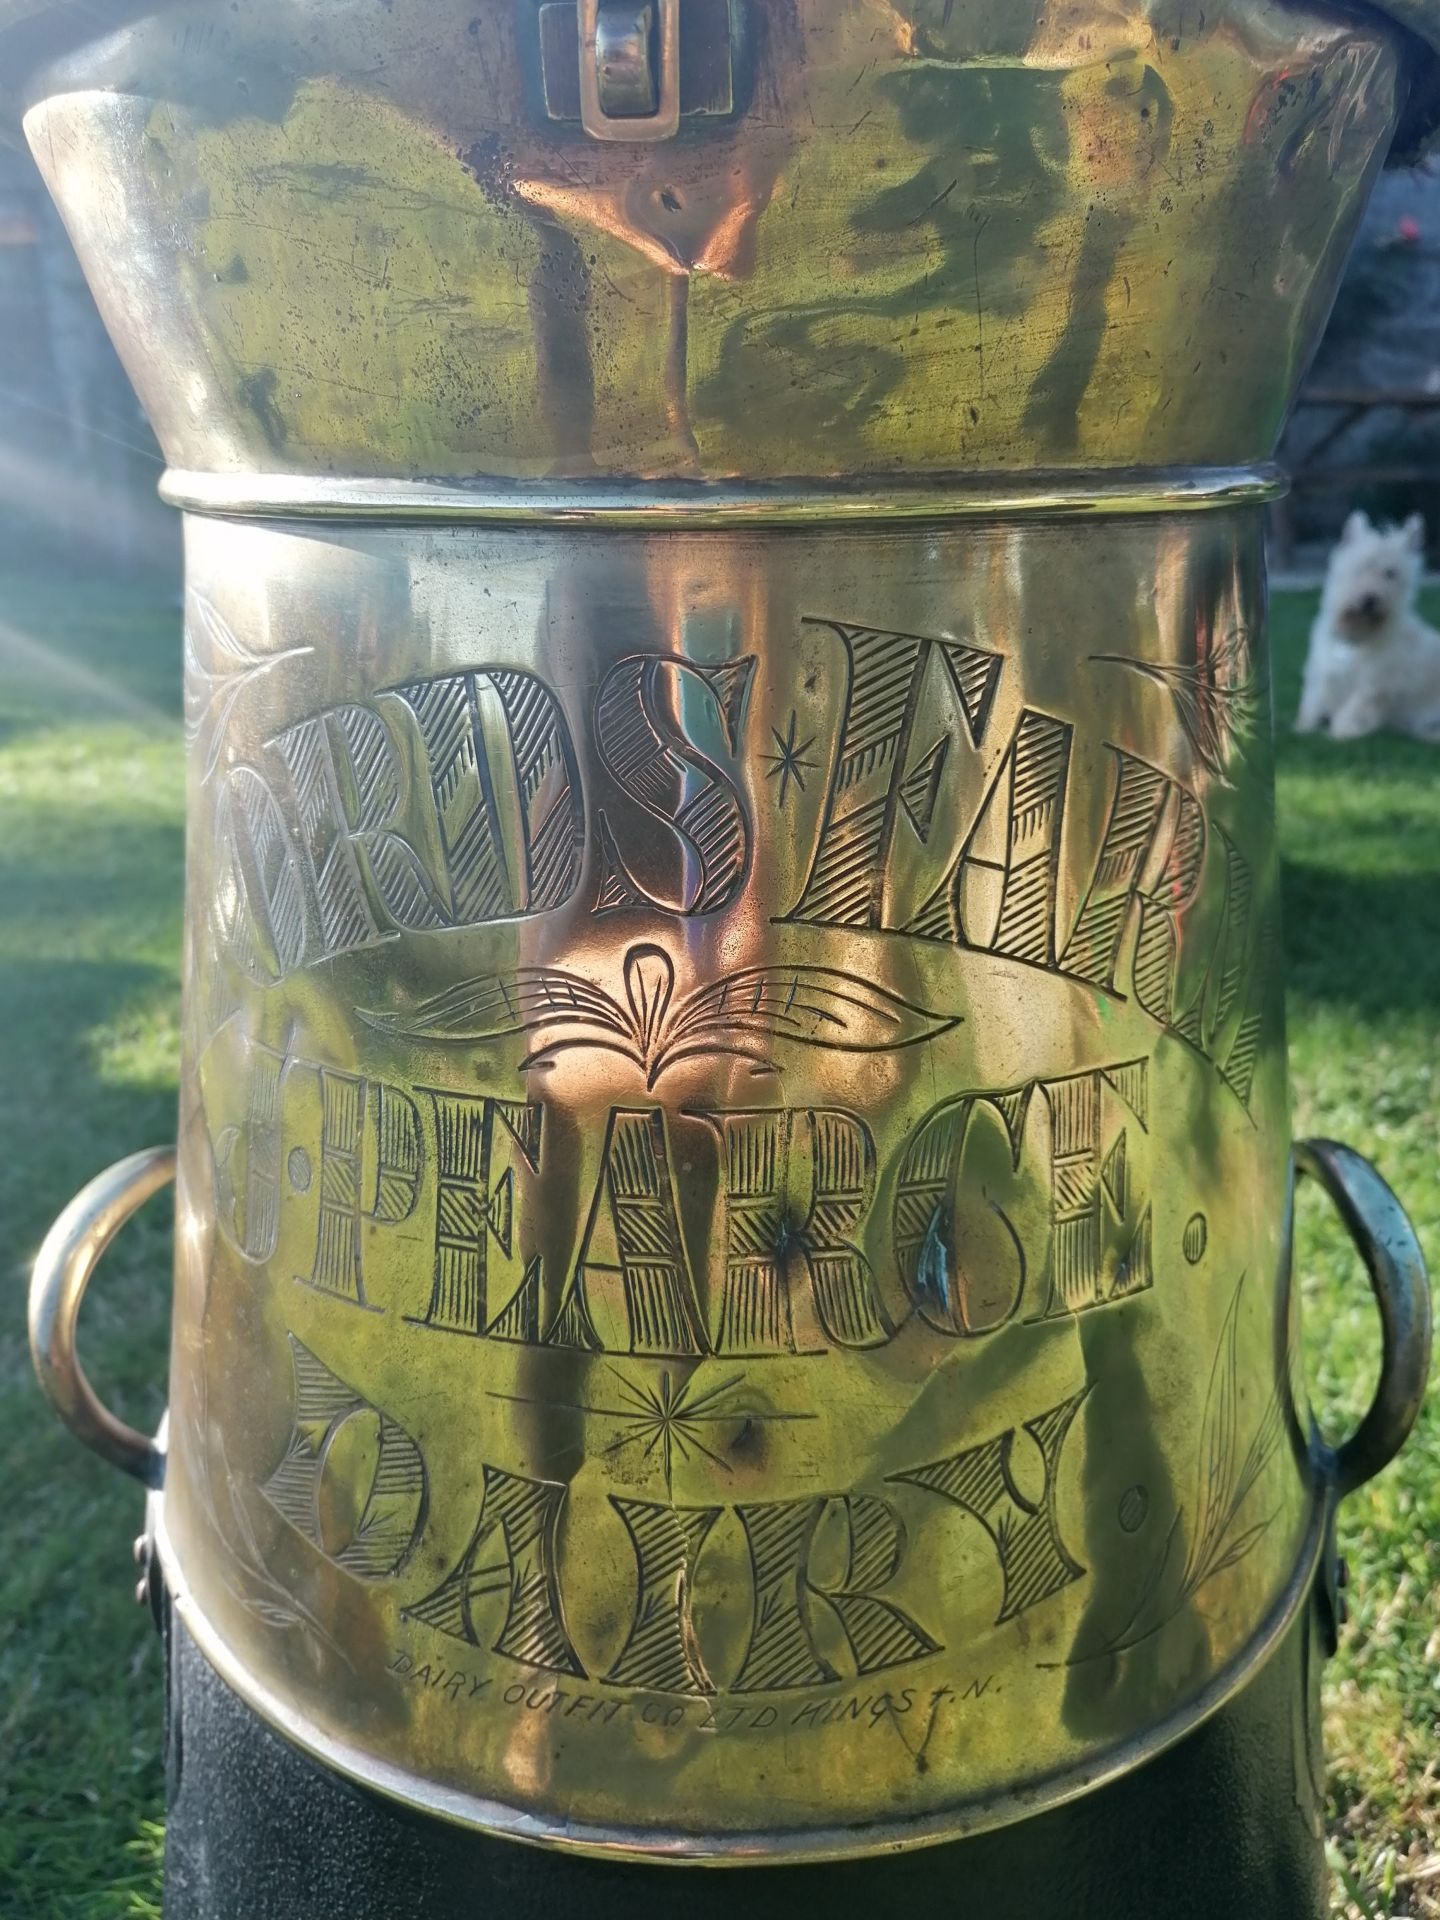 Delivery churn made by Dairy Outfitters Company, half brass engraved Lords Farm J Pearce. 31" high - Image 2 of 2